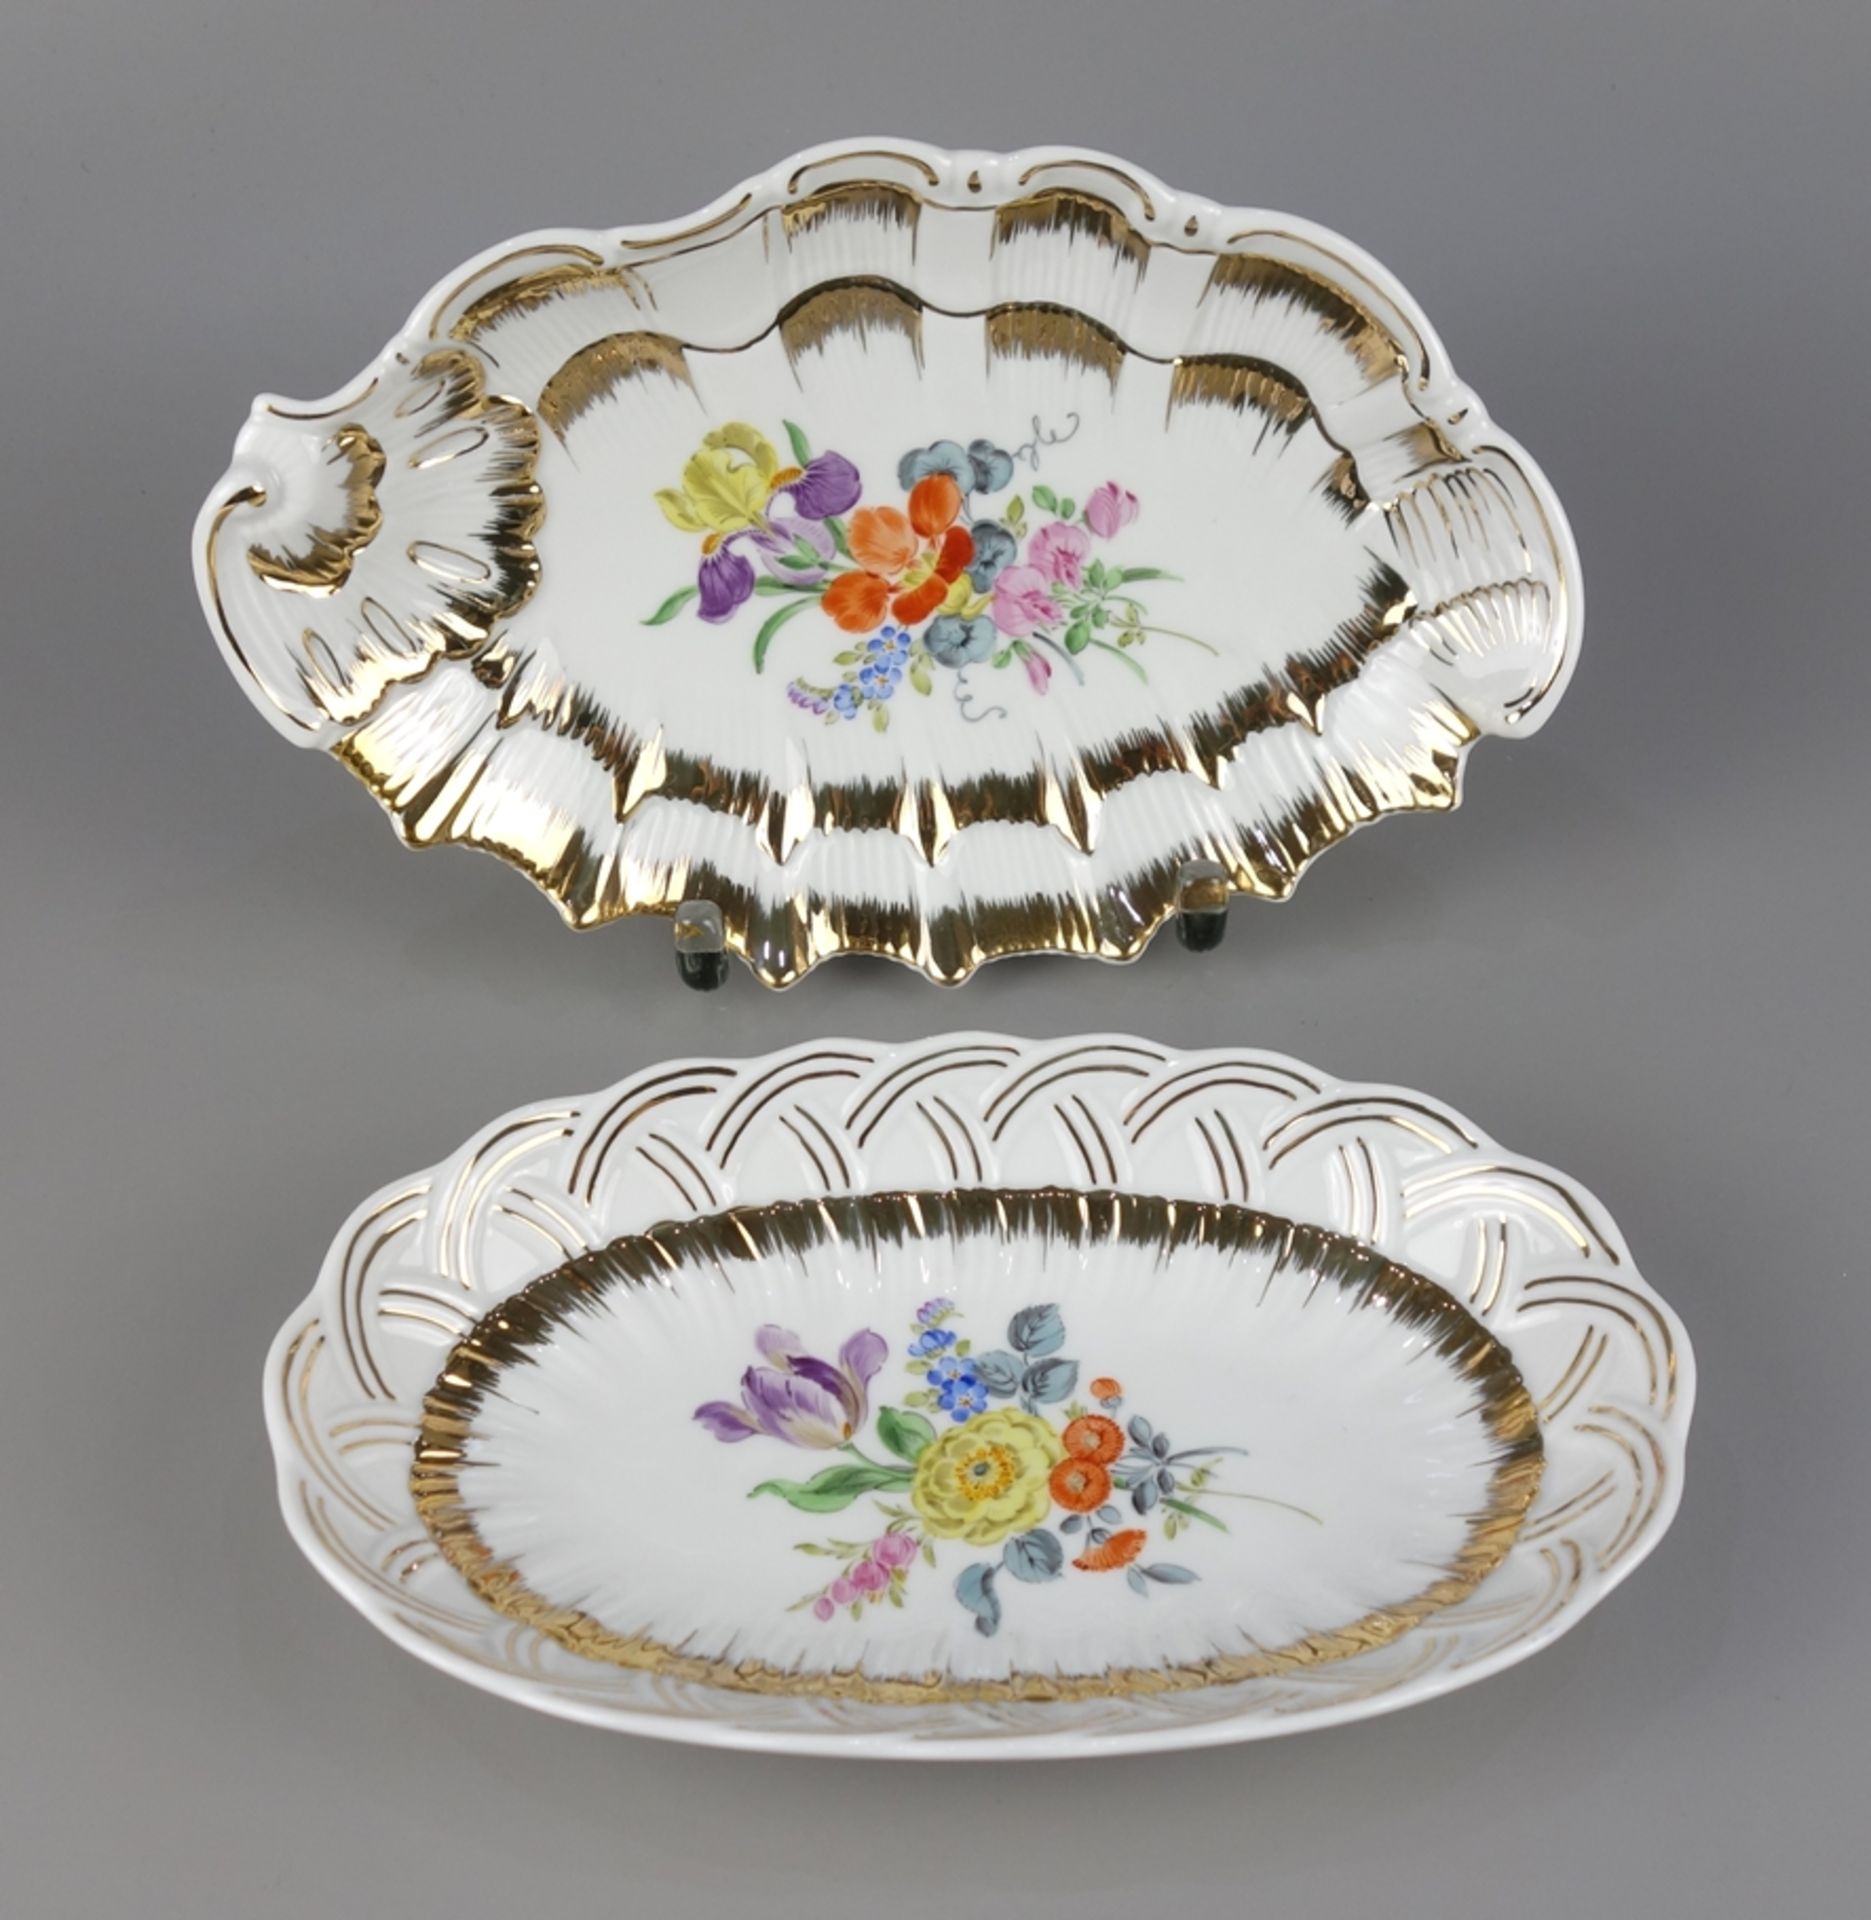 2 bowls with gold decoration and floral painting, Höchster Porzellan, 2nd half 20th cent.